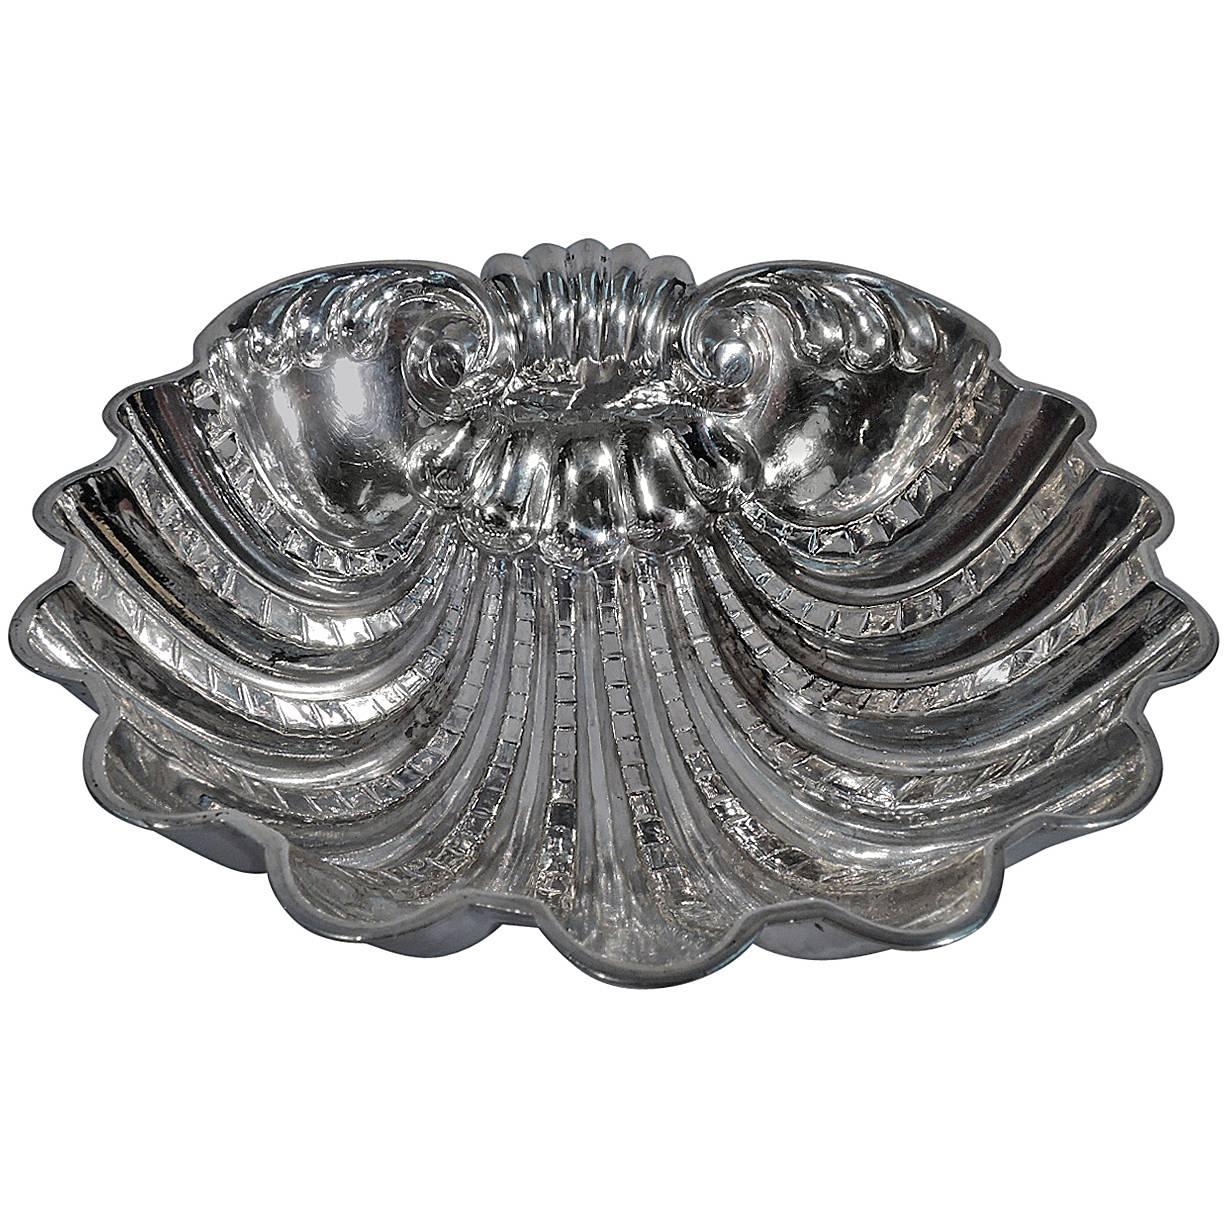 Italian Hand-Hammered Sterling Silver Scallop Shell Bowl